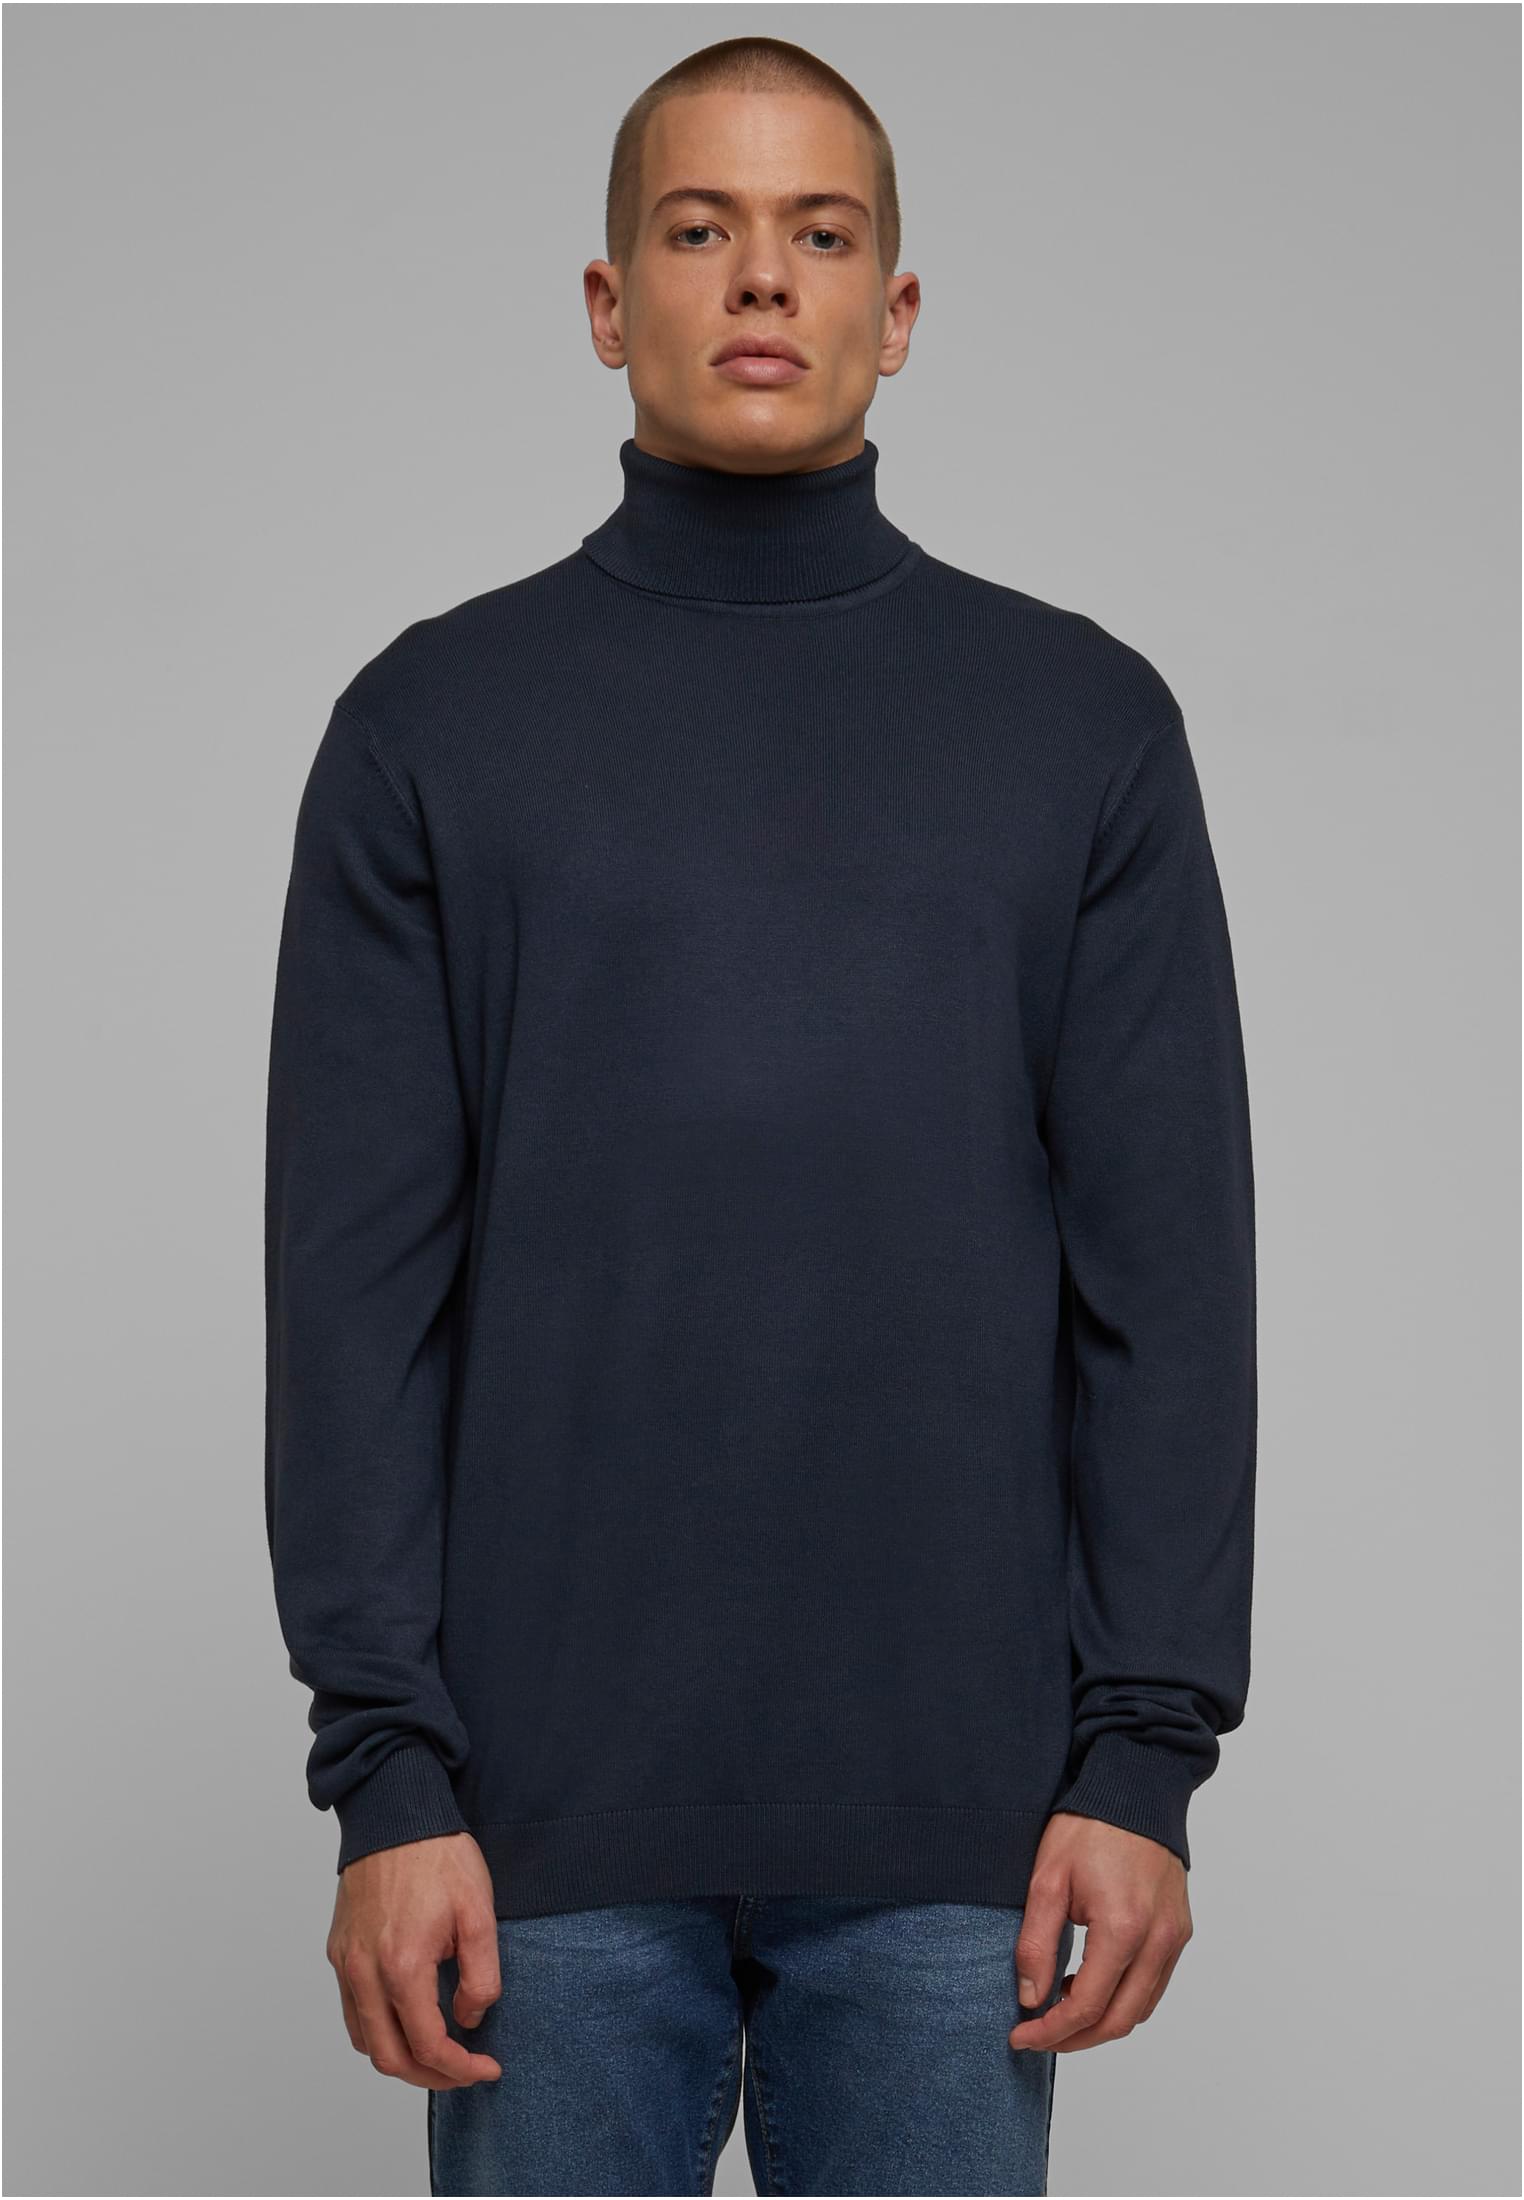 Knitted Turtleneck In A Navy Design